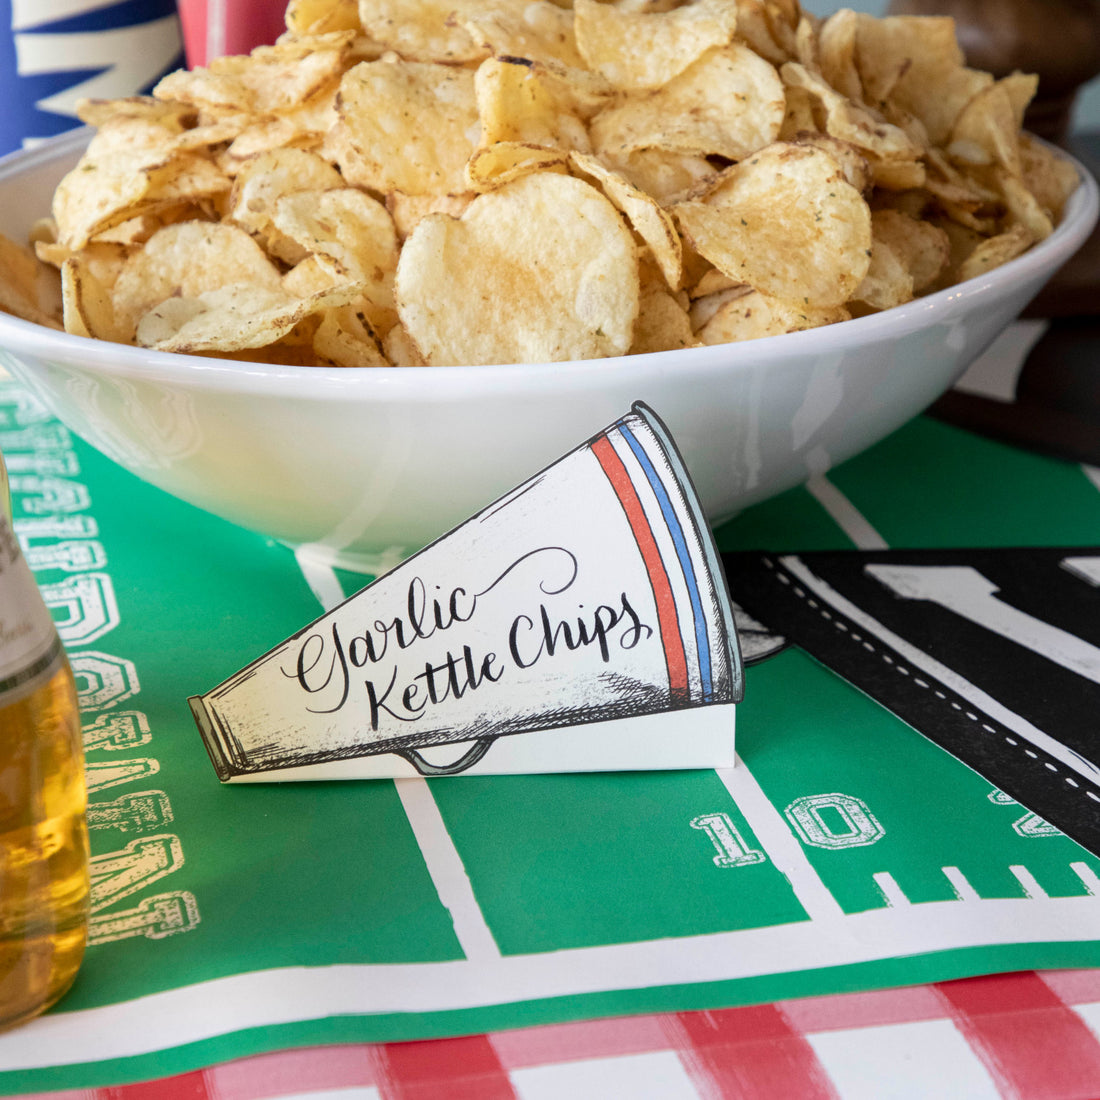 A Megaphone Place Card labeled &quot;Garlic Kettle Chips&quot; on a gameday snack table.